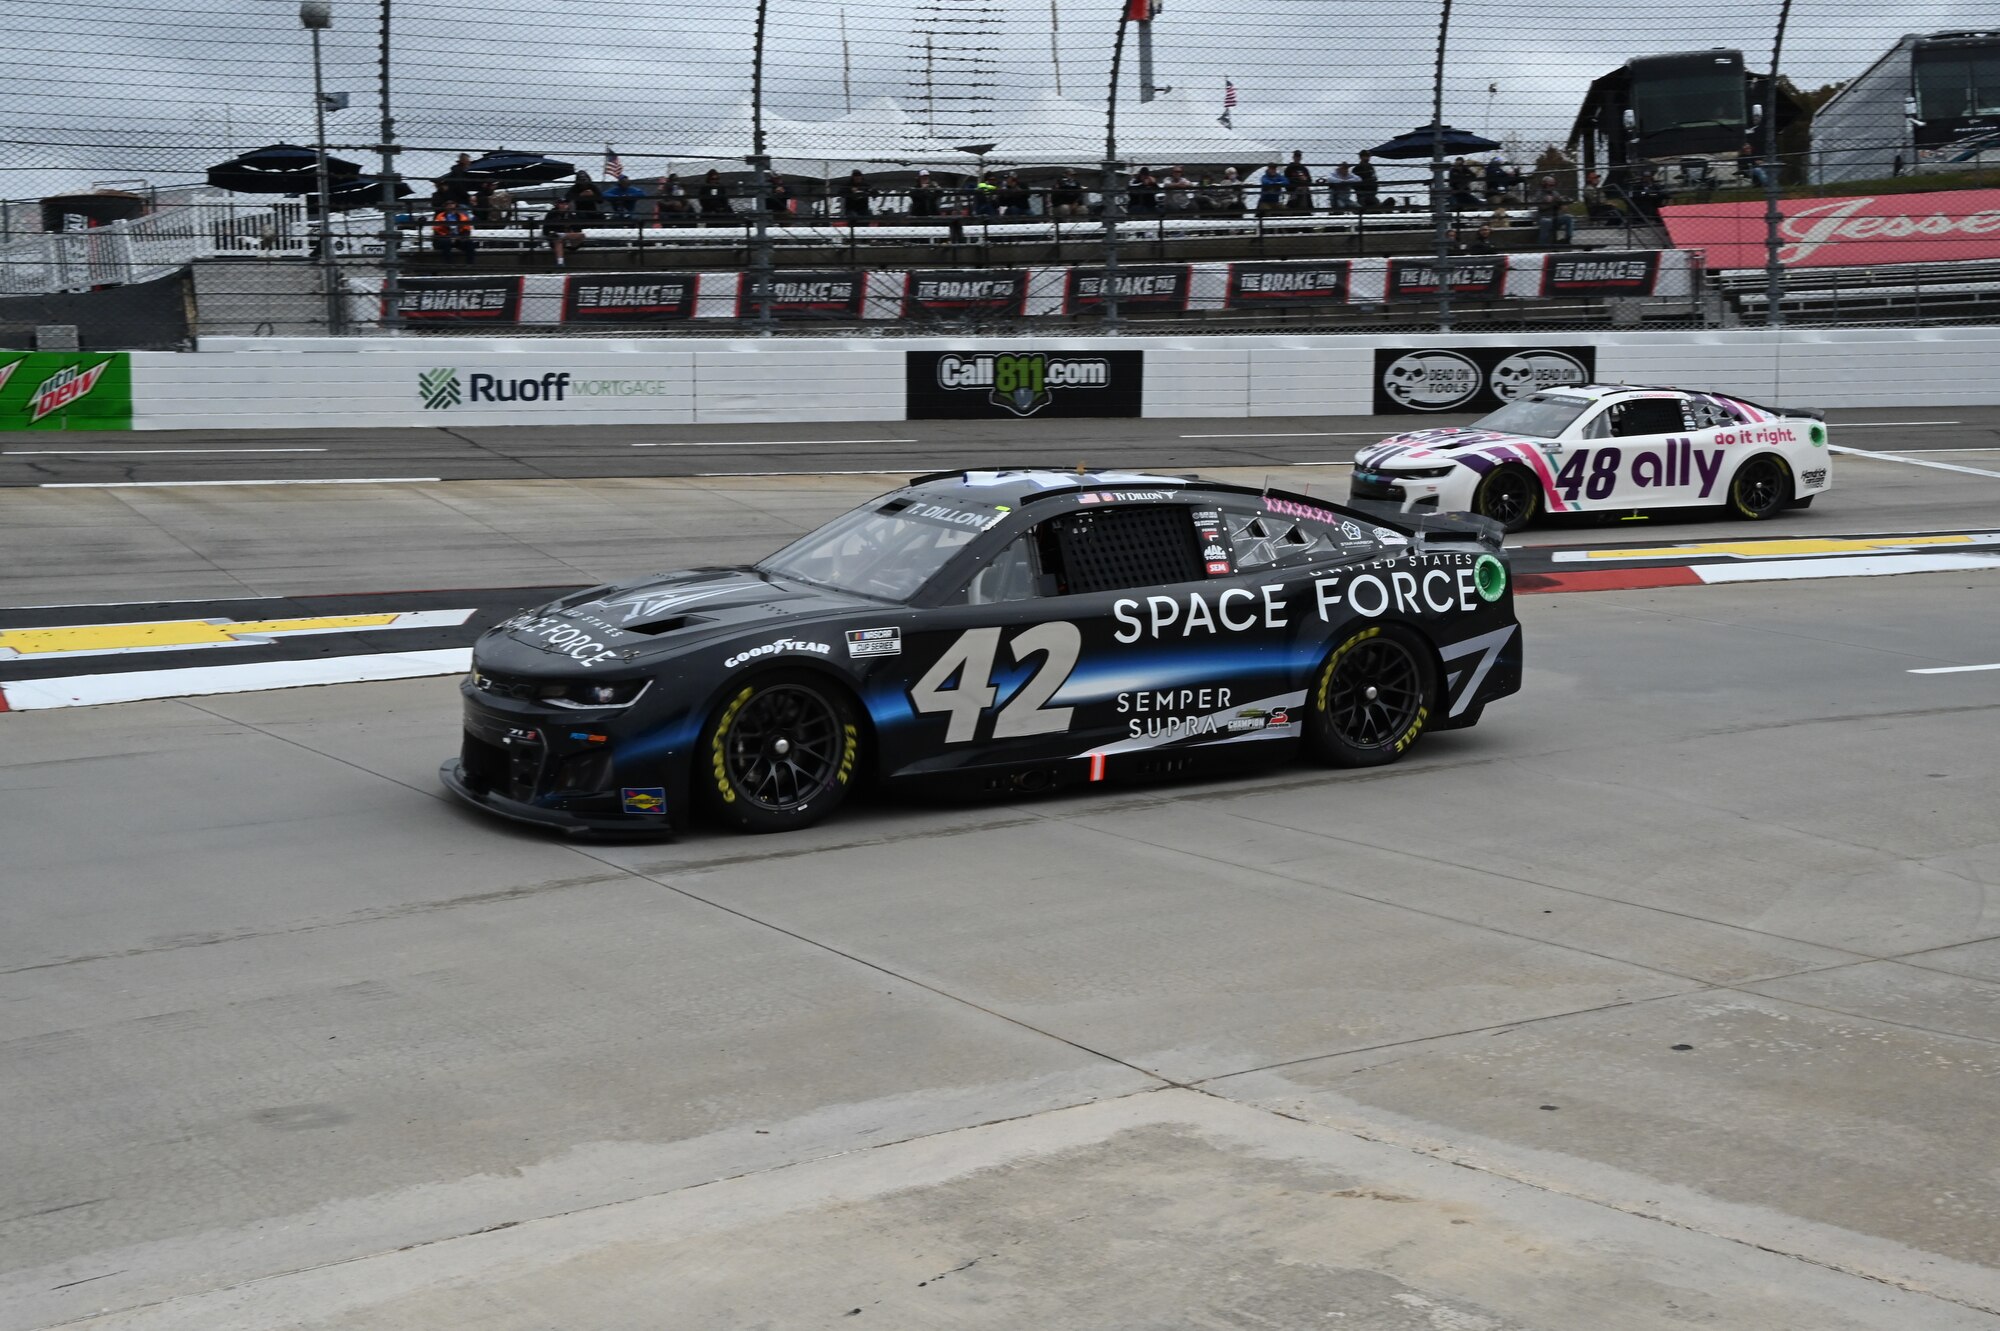 Petty GMS debuts U.S. Space Force paint scheme car in its first competitive race